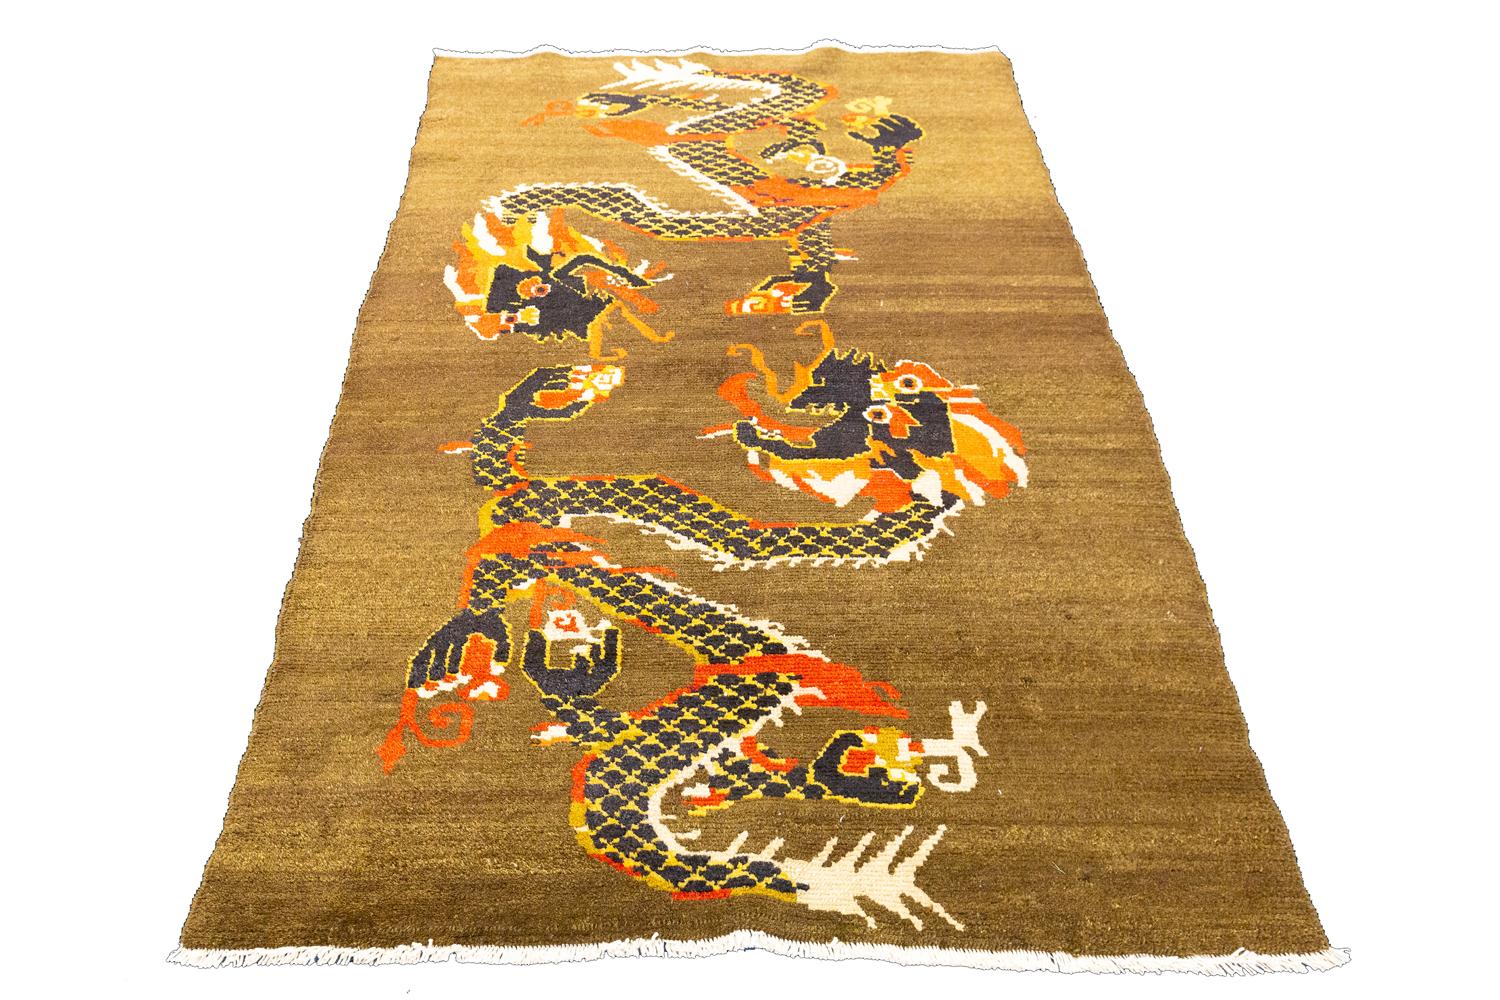 This Tibetan Dragon rug is a beautiful and unique addition to your home. The intricate hand-knotted wool design features two central dragons , set against a minimalist dark shades of green background color. perfect for adding a touch of luxury and